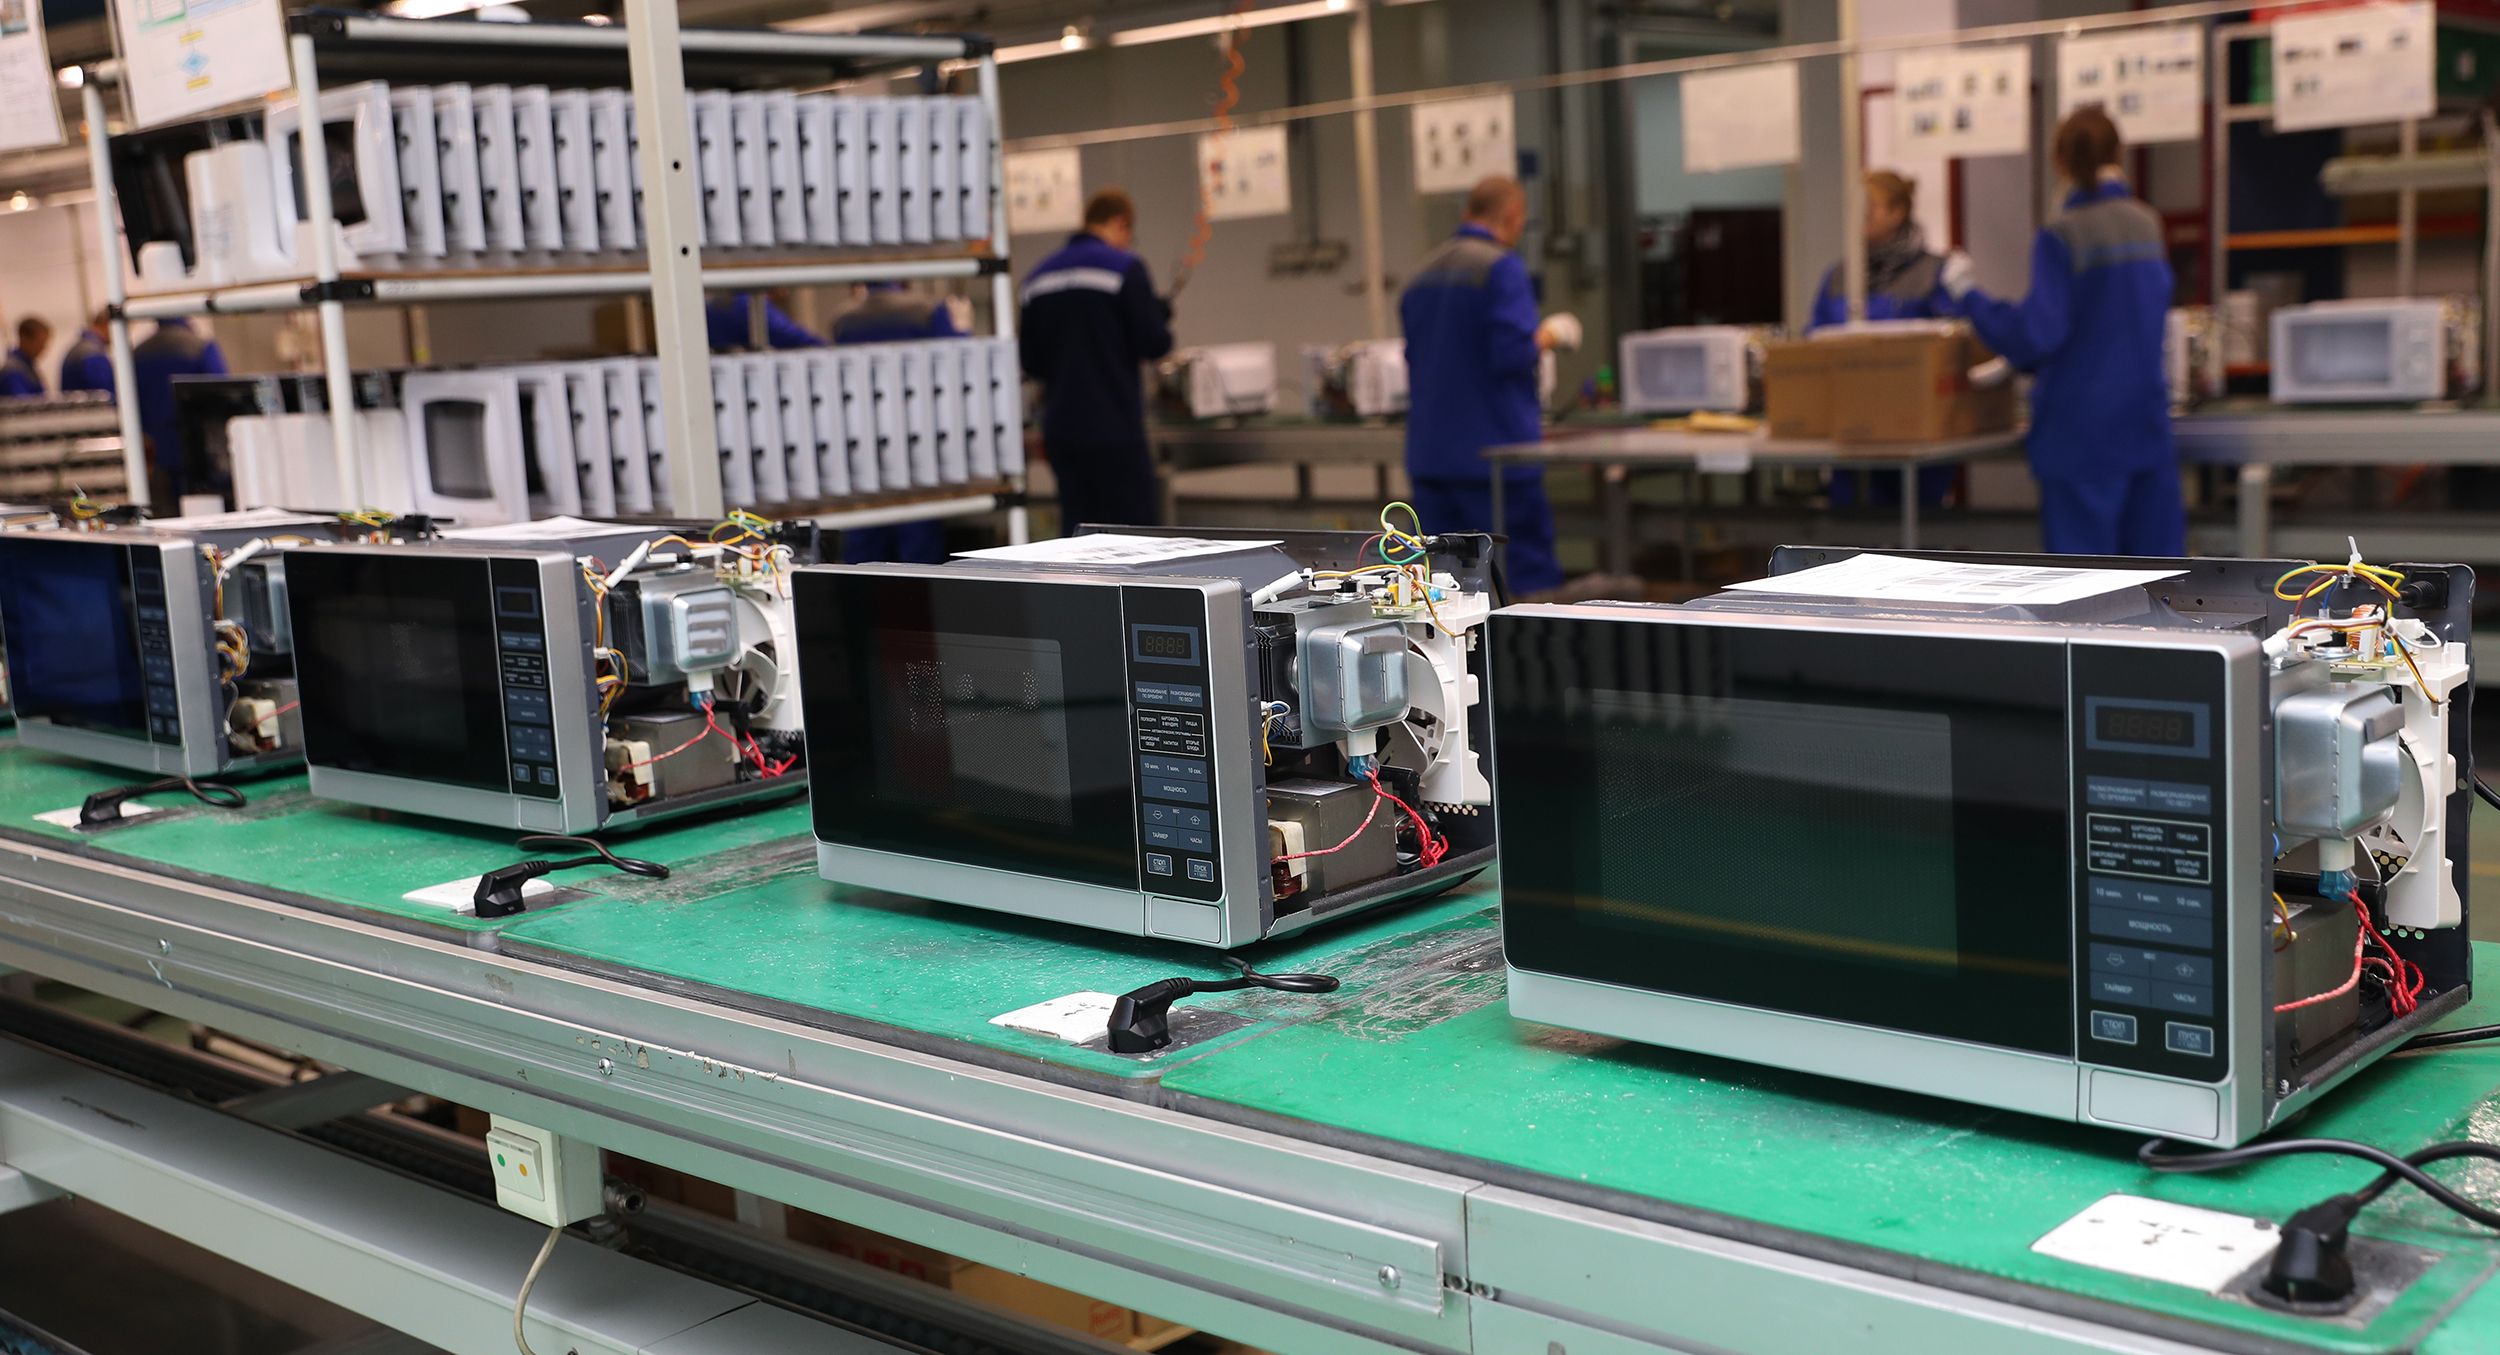 Manufacture of microwave ovens. Assembly line